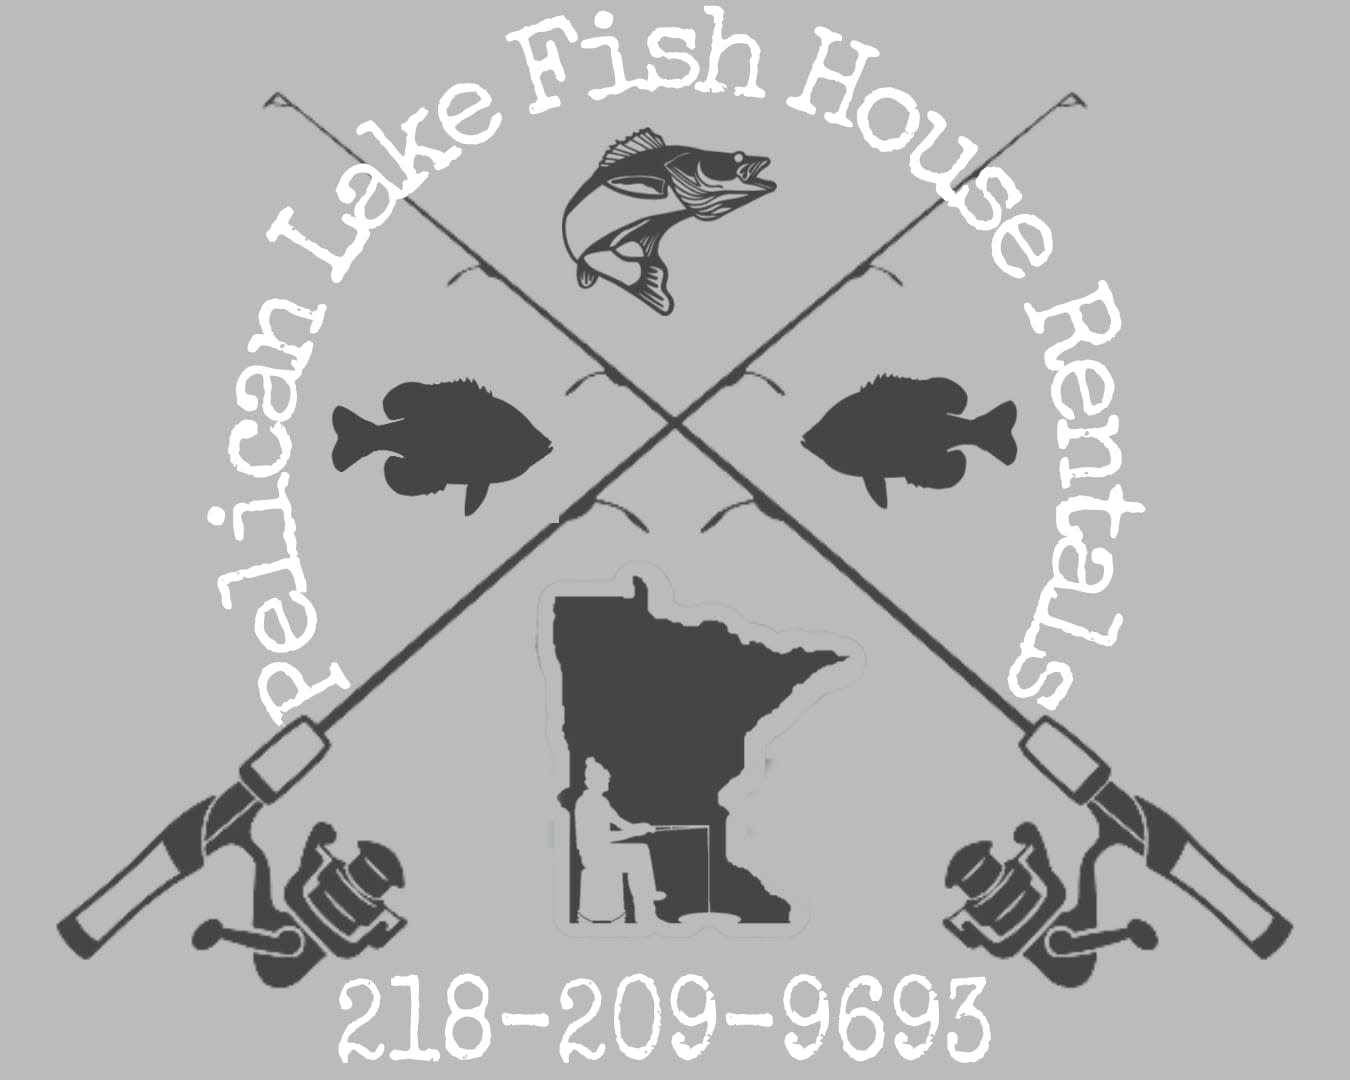 Pelican Lake Fish House Rentals and Guide Service – Business